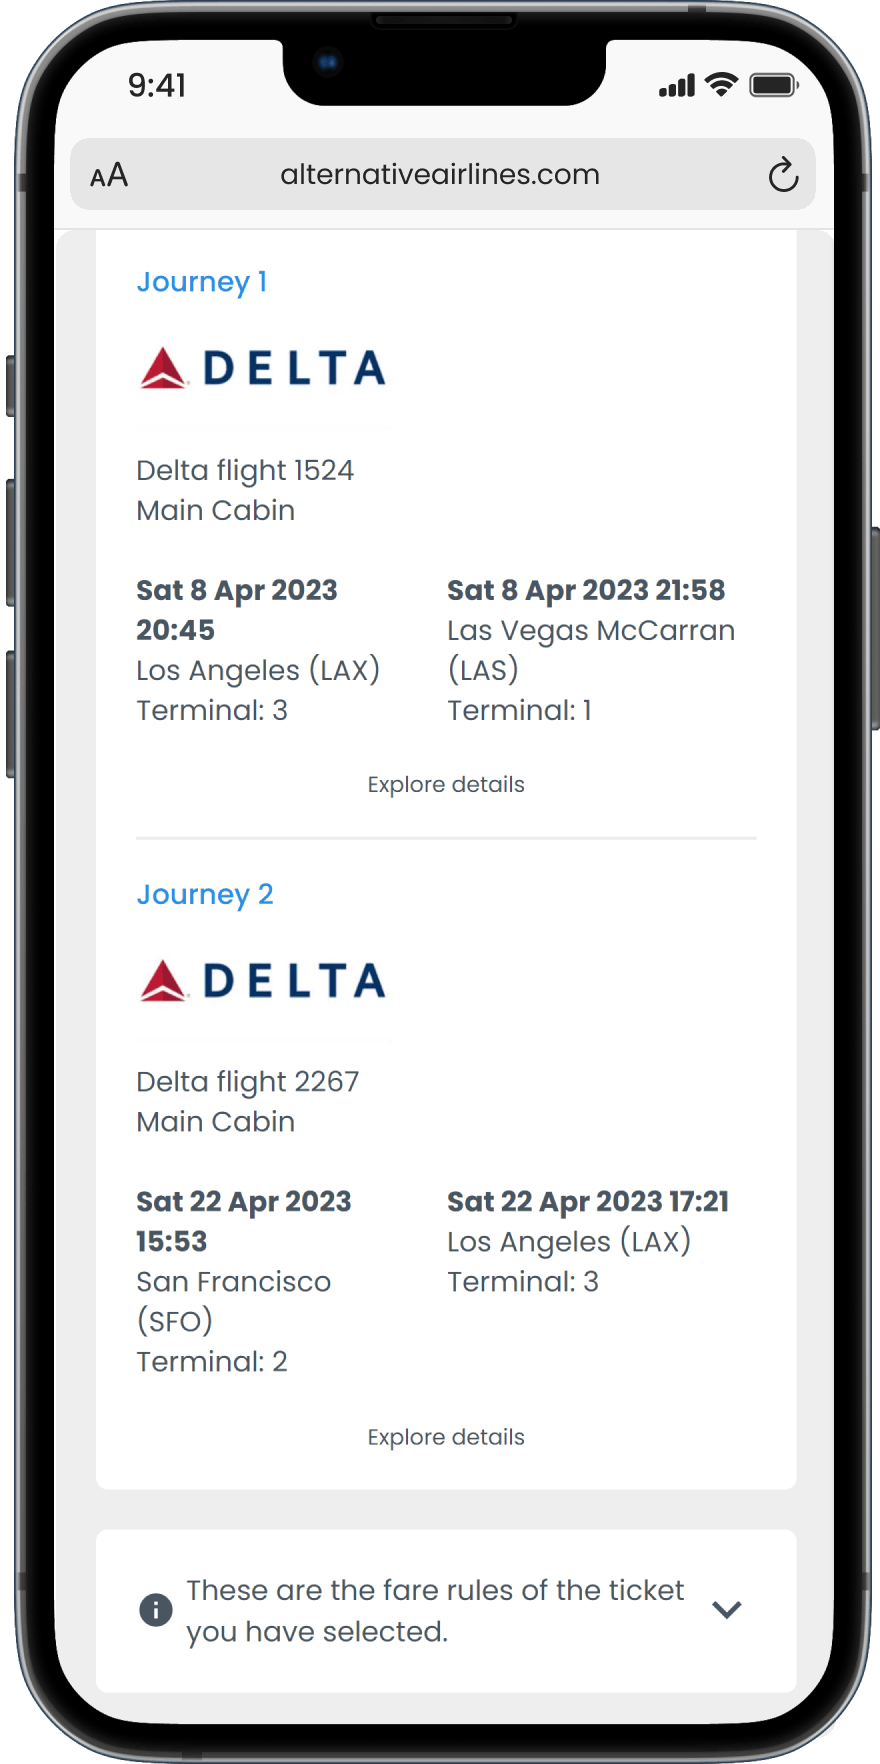 Step 3 - View flight details and confirm booking